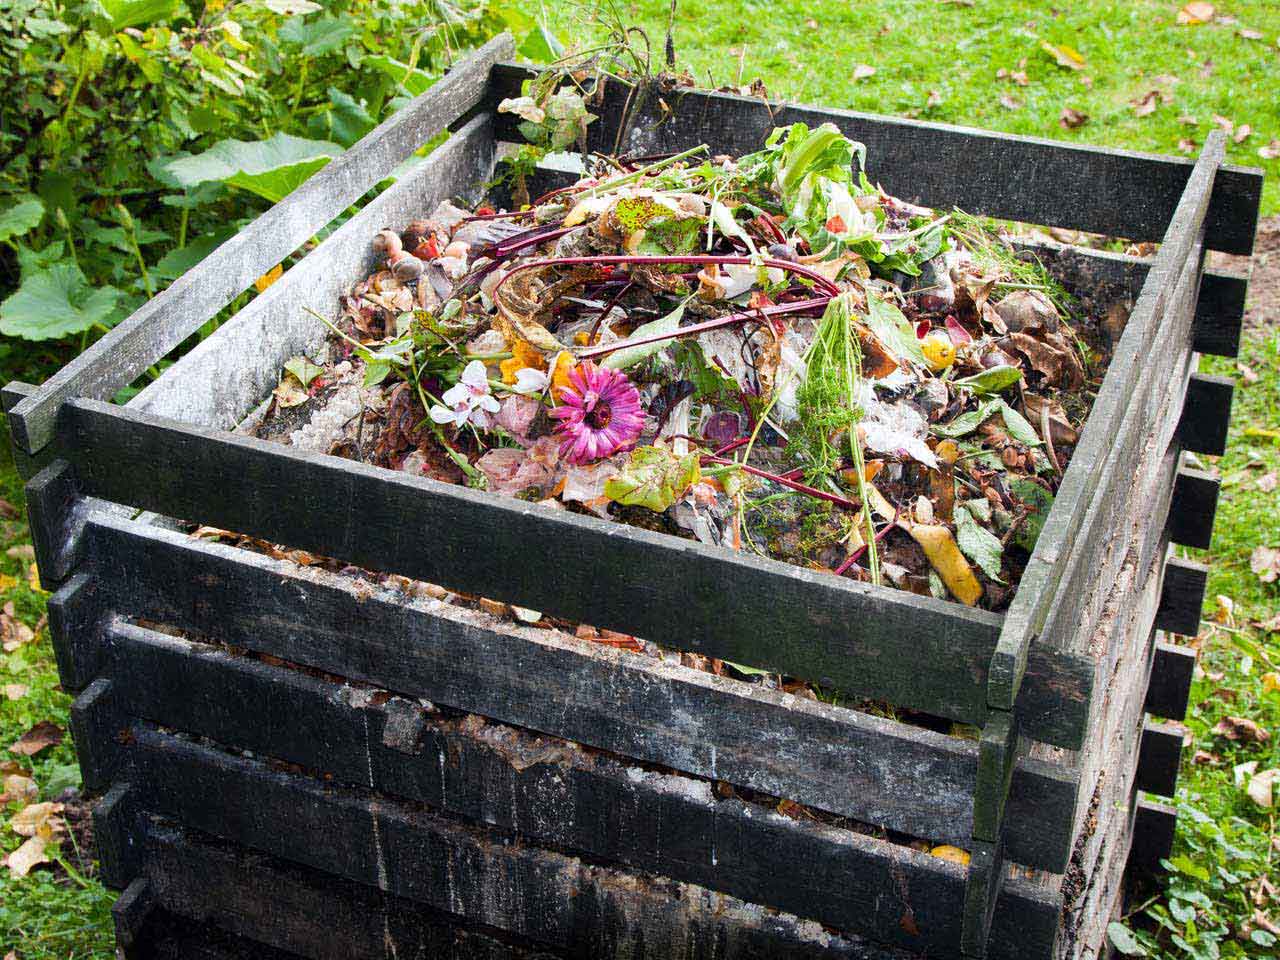 Compare prices for COMPOST across all European  stores